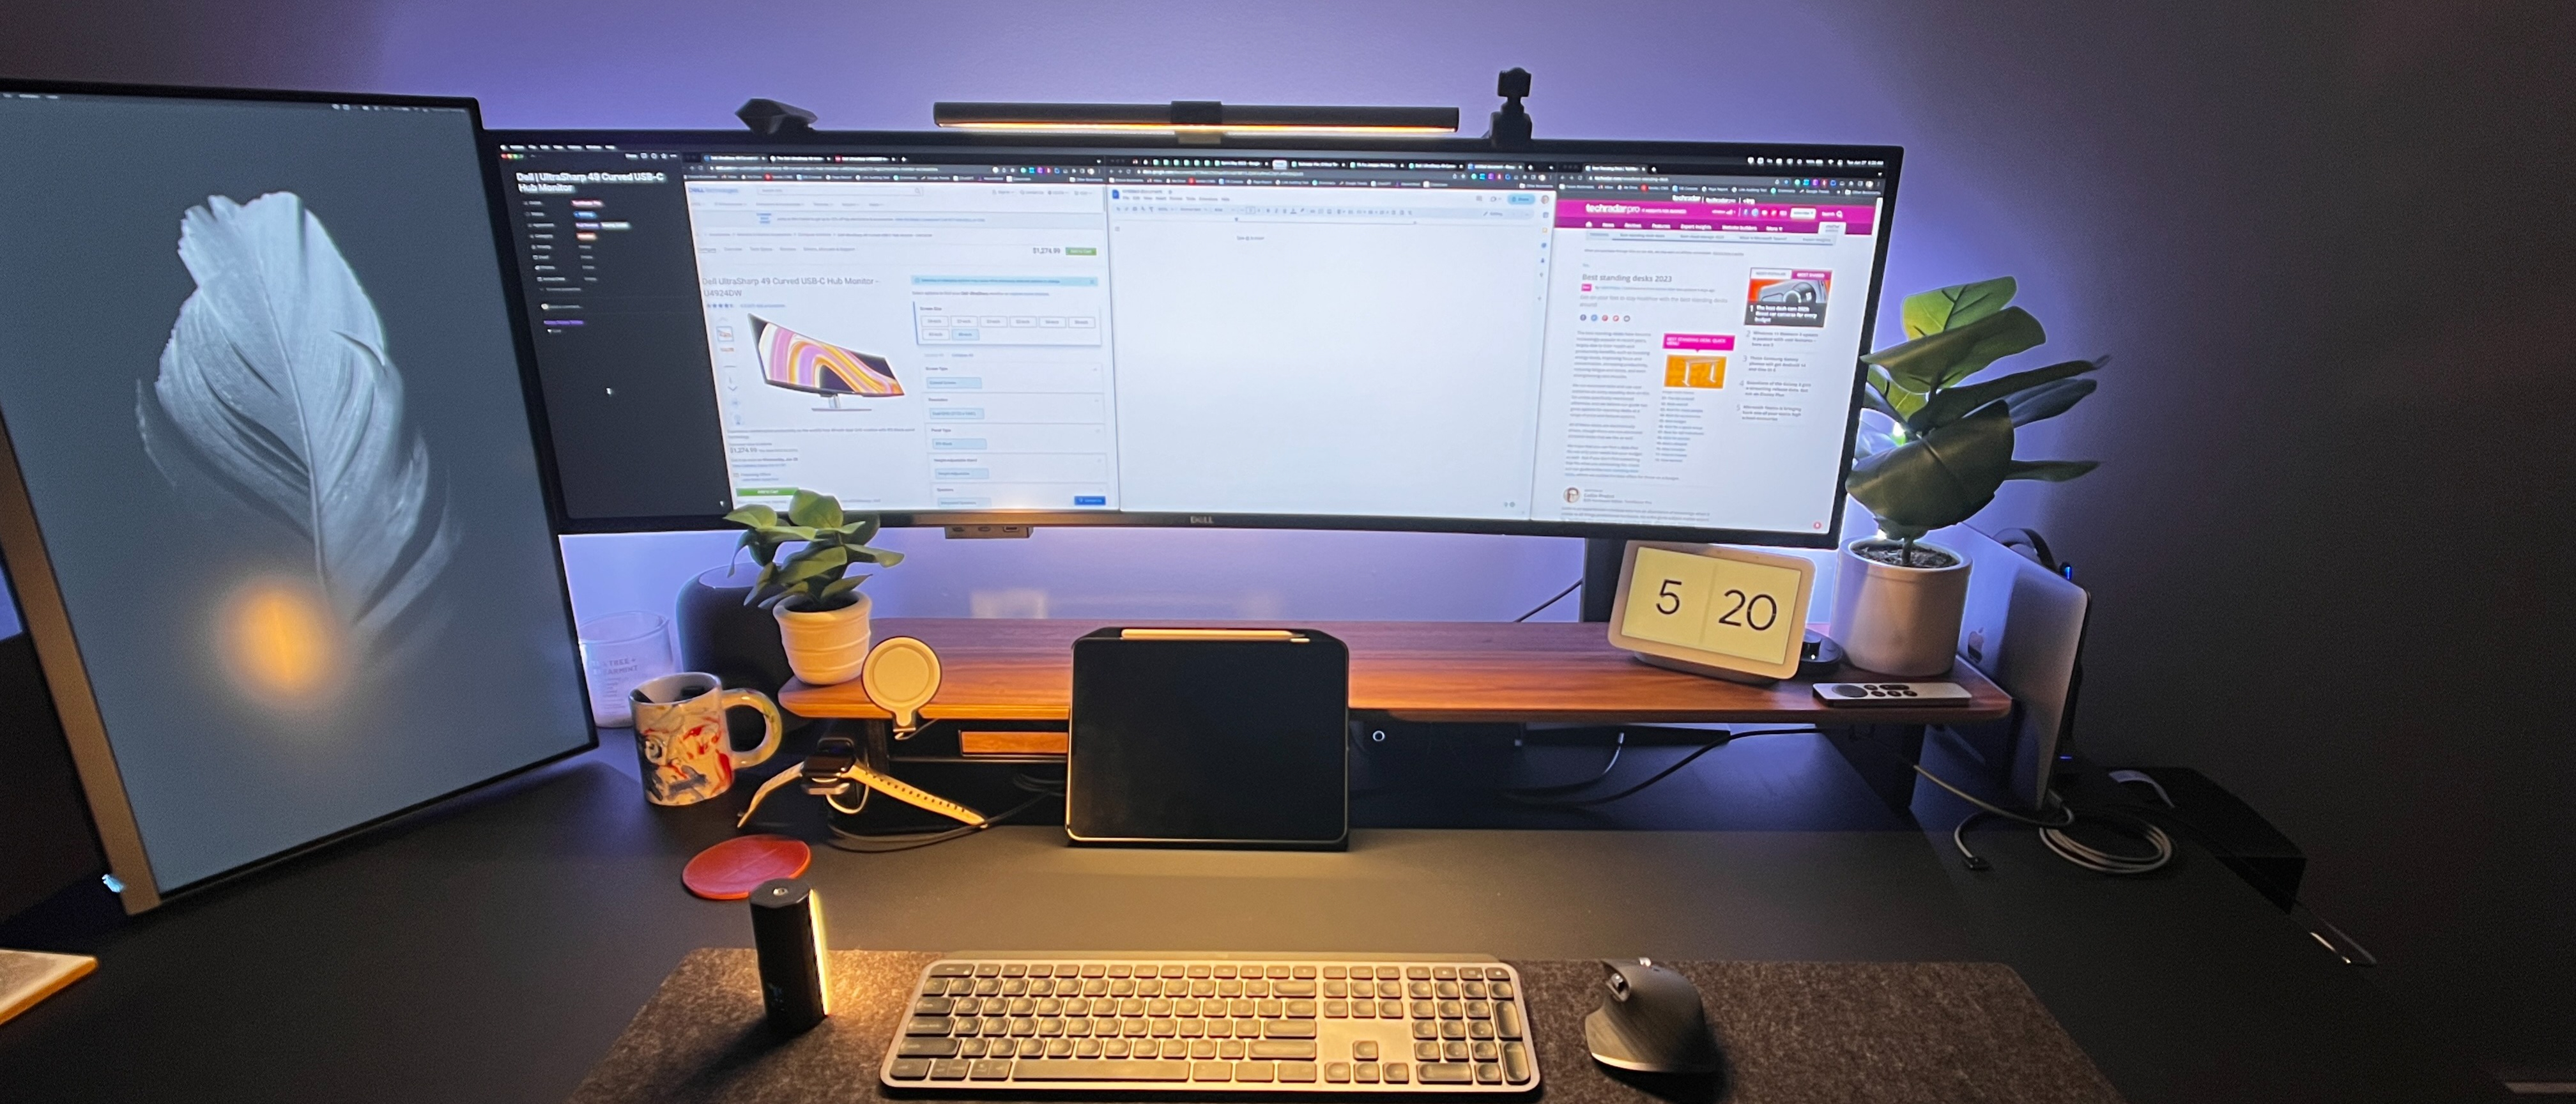 Dell UltraSharp 49-inch Curved USB-C Hub Monitor Review